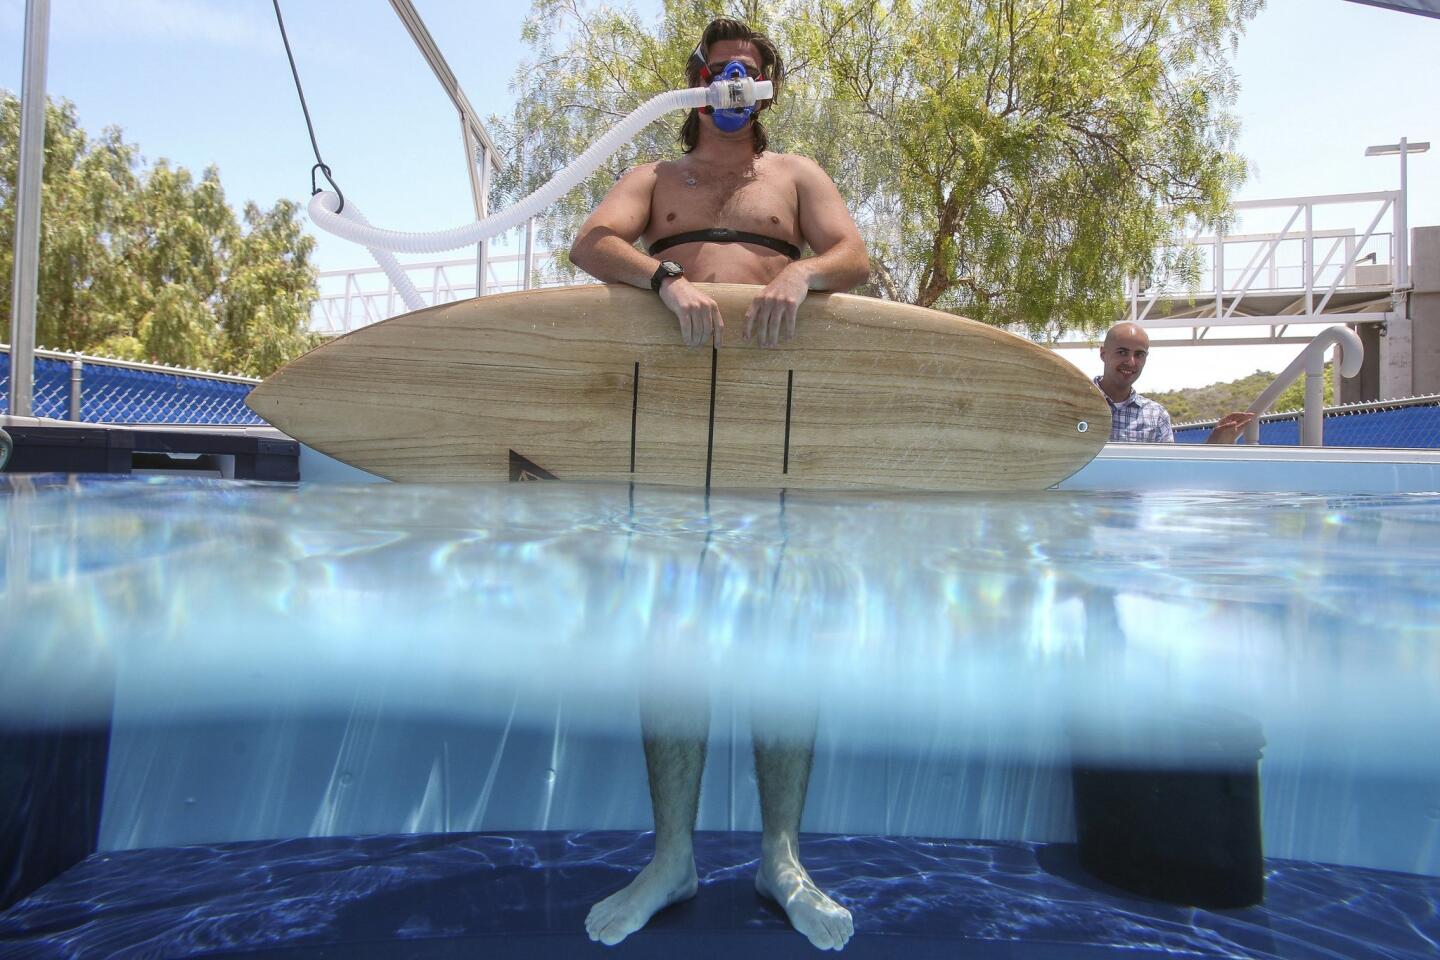 Kinesiology student and intern Cody Cuchna, 24, holds a surfboard while wearing a mask, to measure oxygen consumption, as he gets ready to paddle a surfboard in the swim flume.